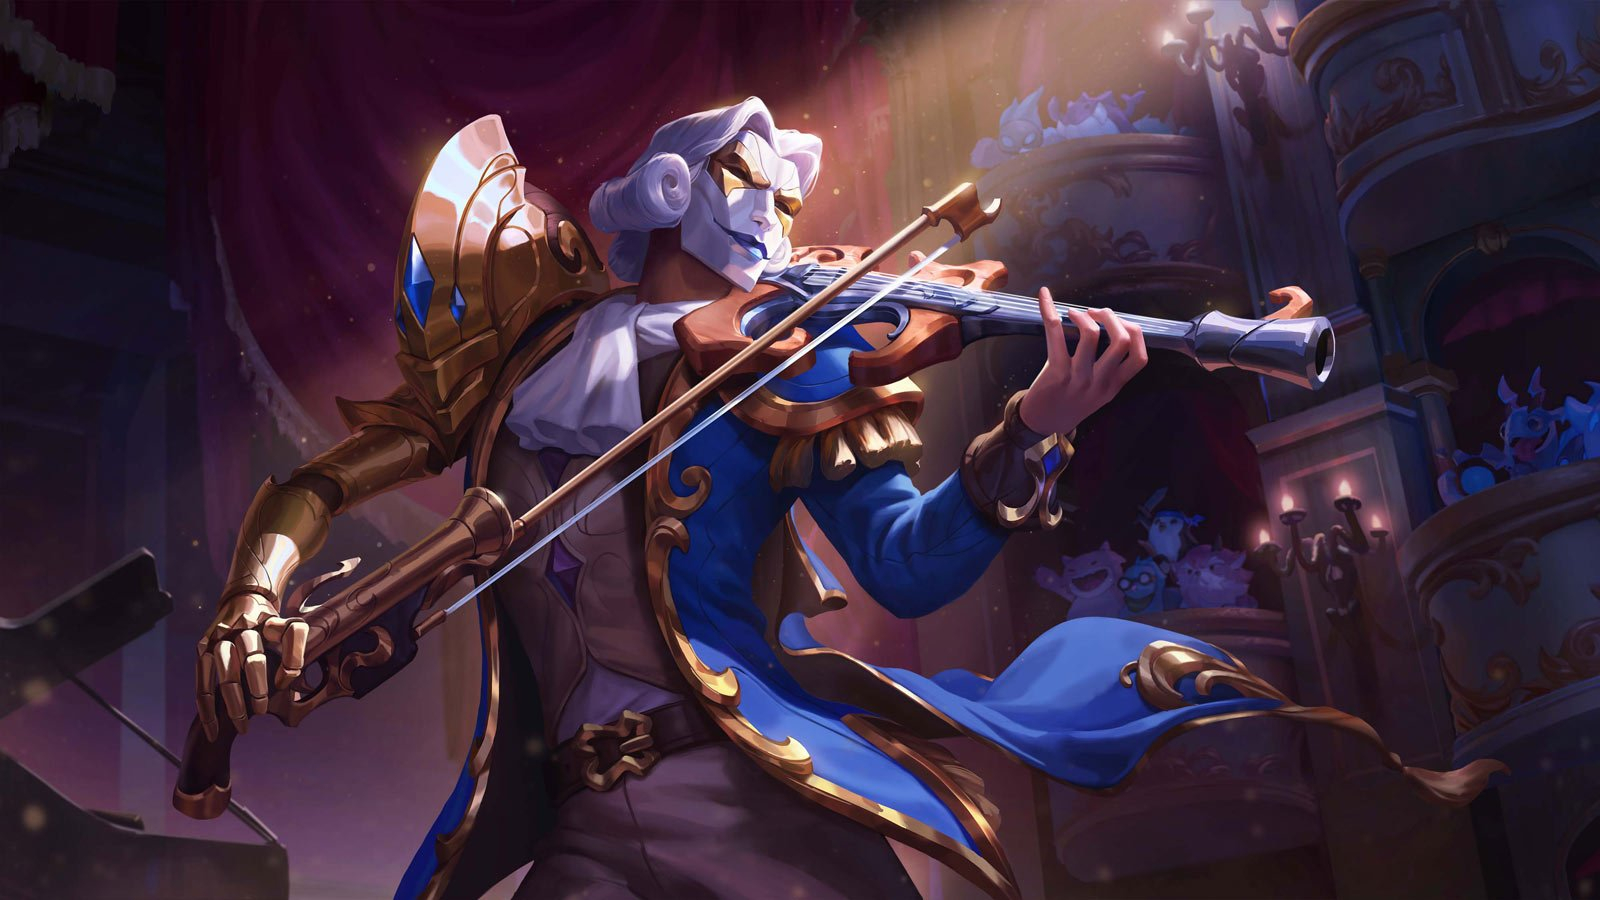 It looks like TFT will use LoR art (or is it the other way around